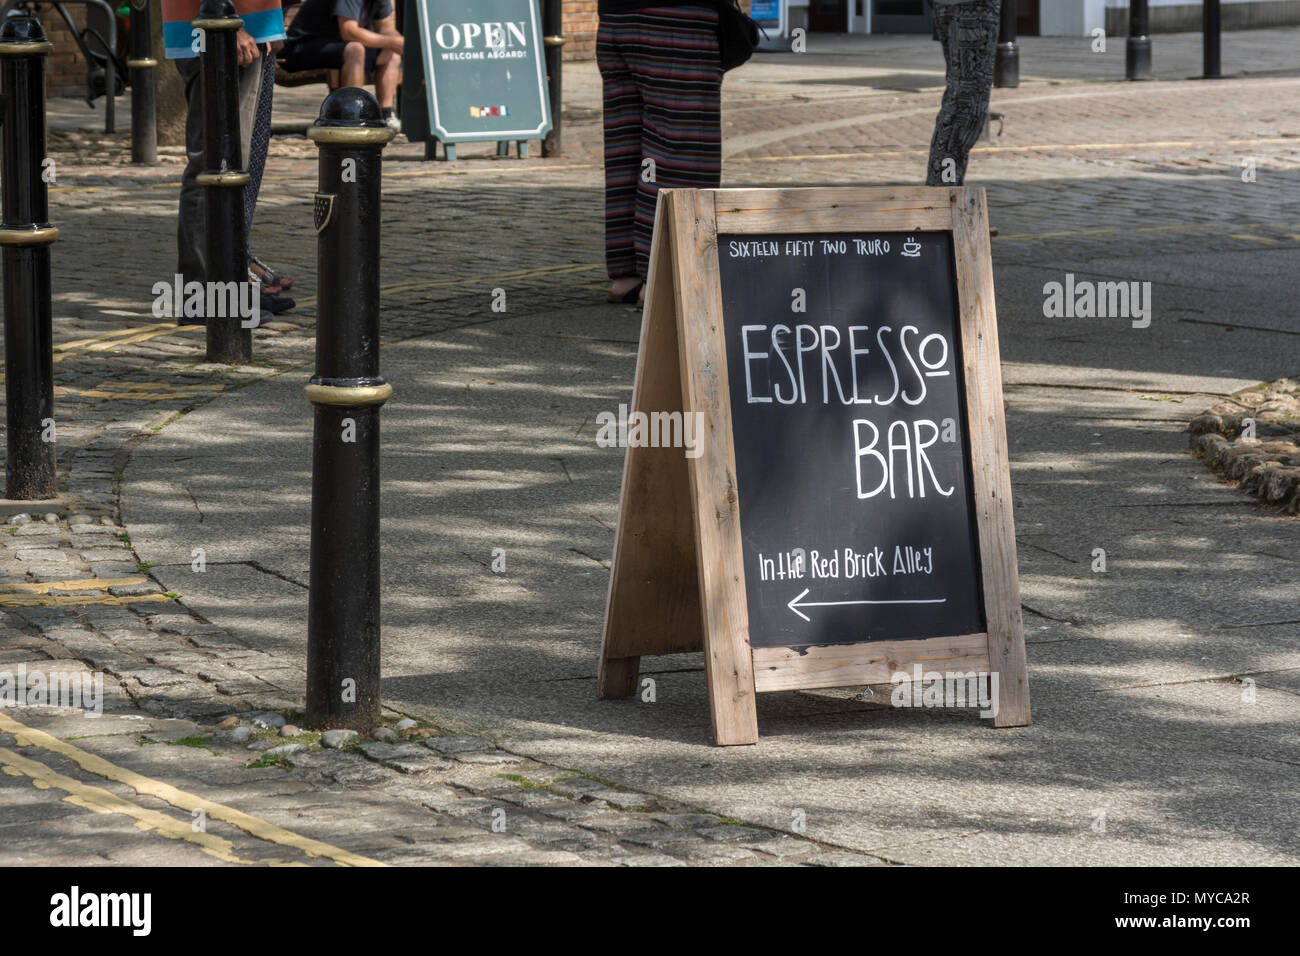 A-Frame advertising board for Cafe / Bar in Truro City, Cornwall. A Frame board. Stock Photo